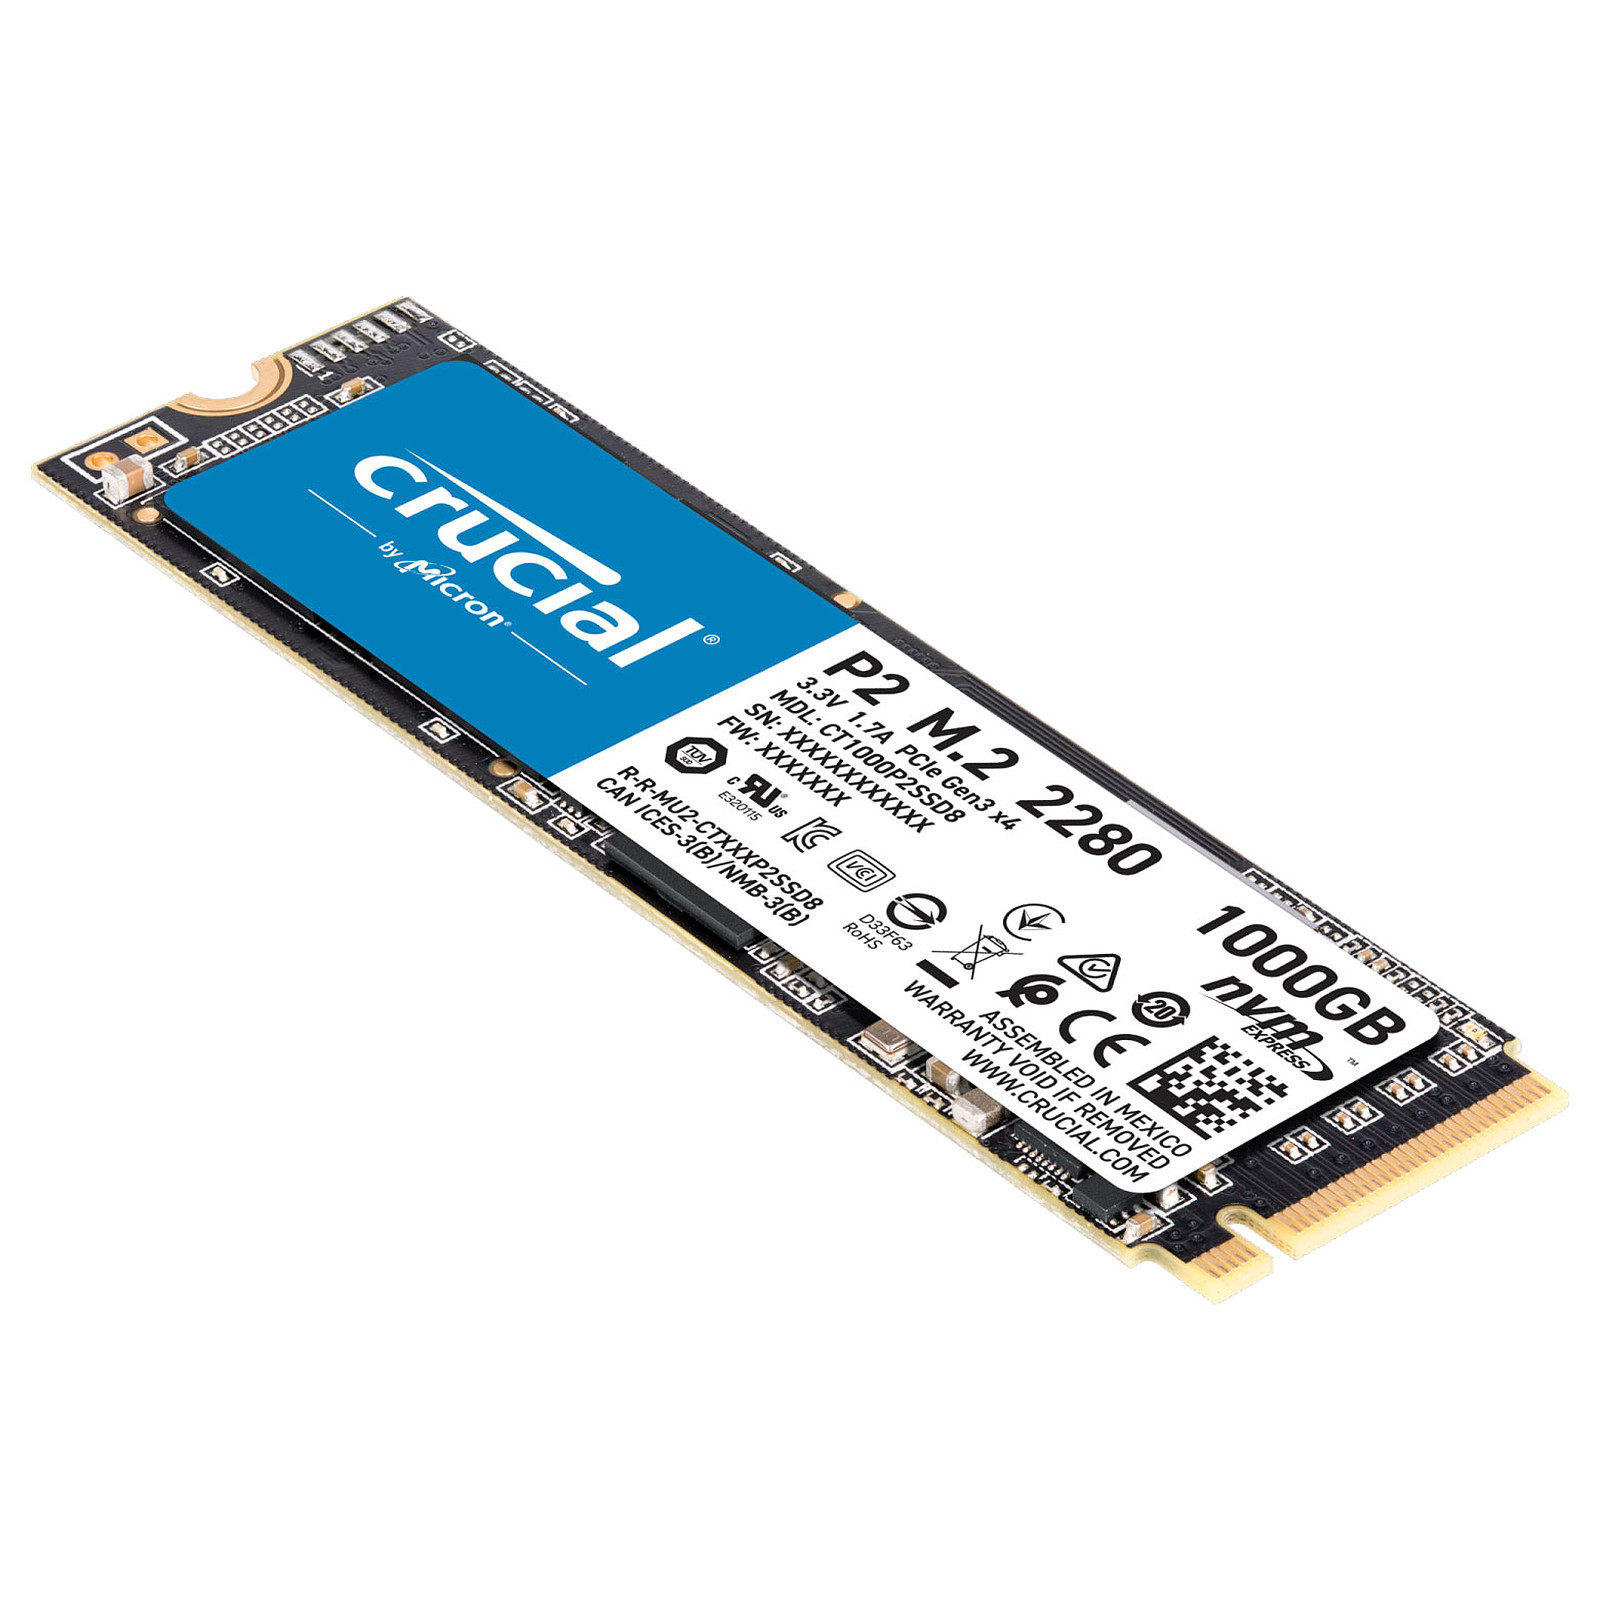 Disque Dur SSD M2 NVME P2 1 To CRUCIAL - HDSSDCRUCIAL1T 